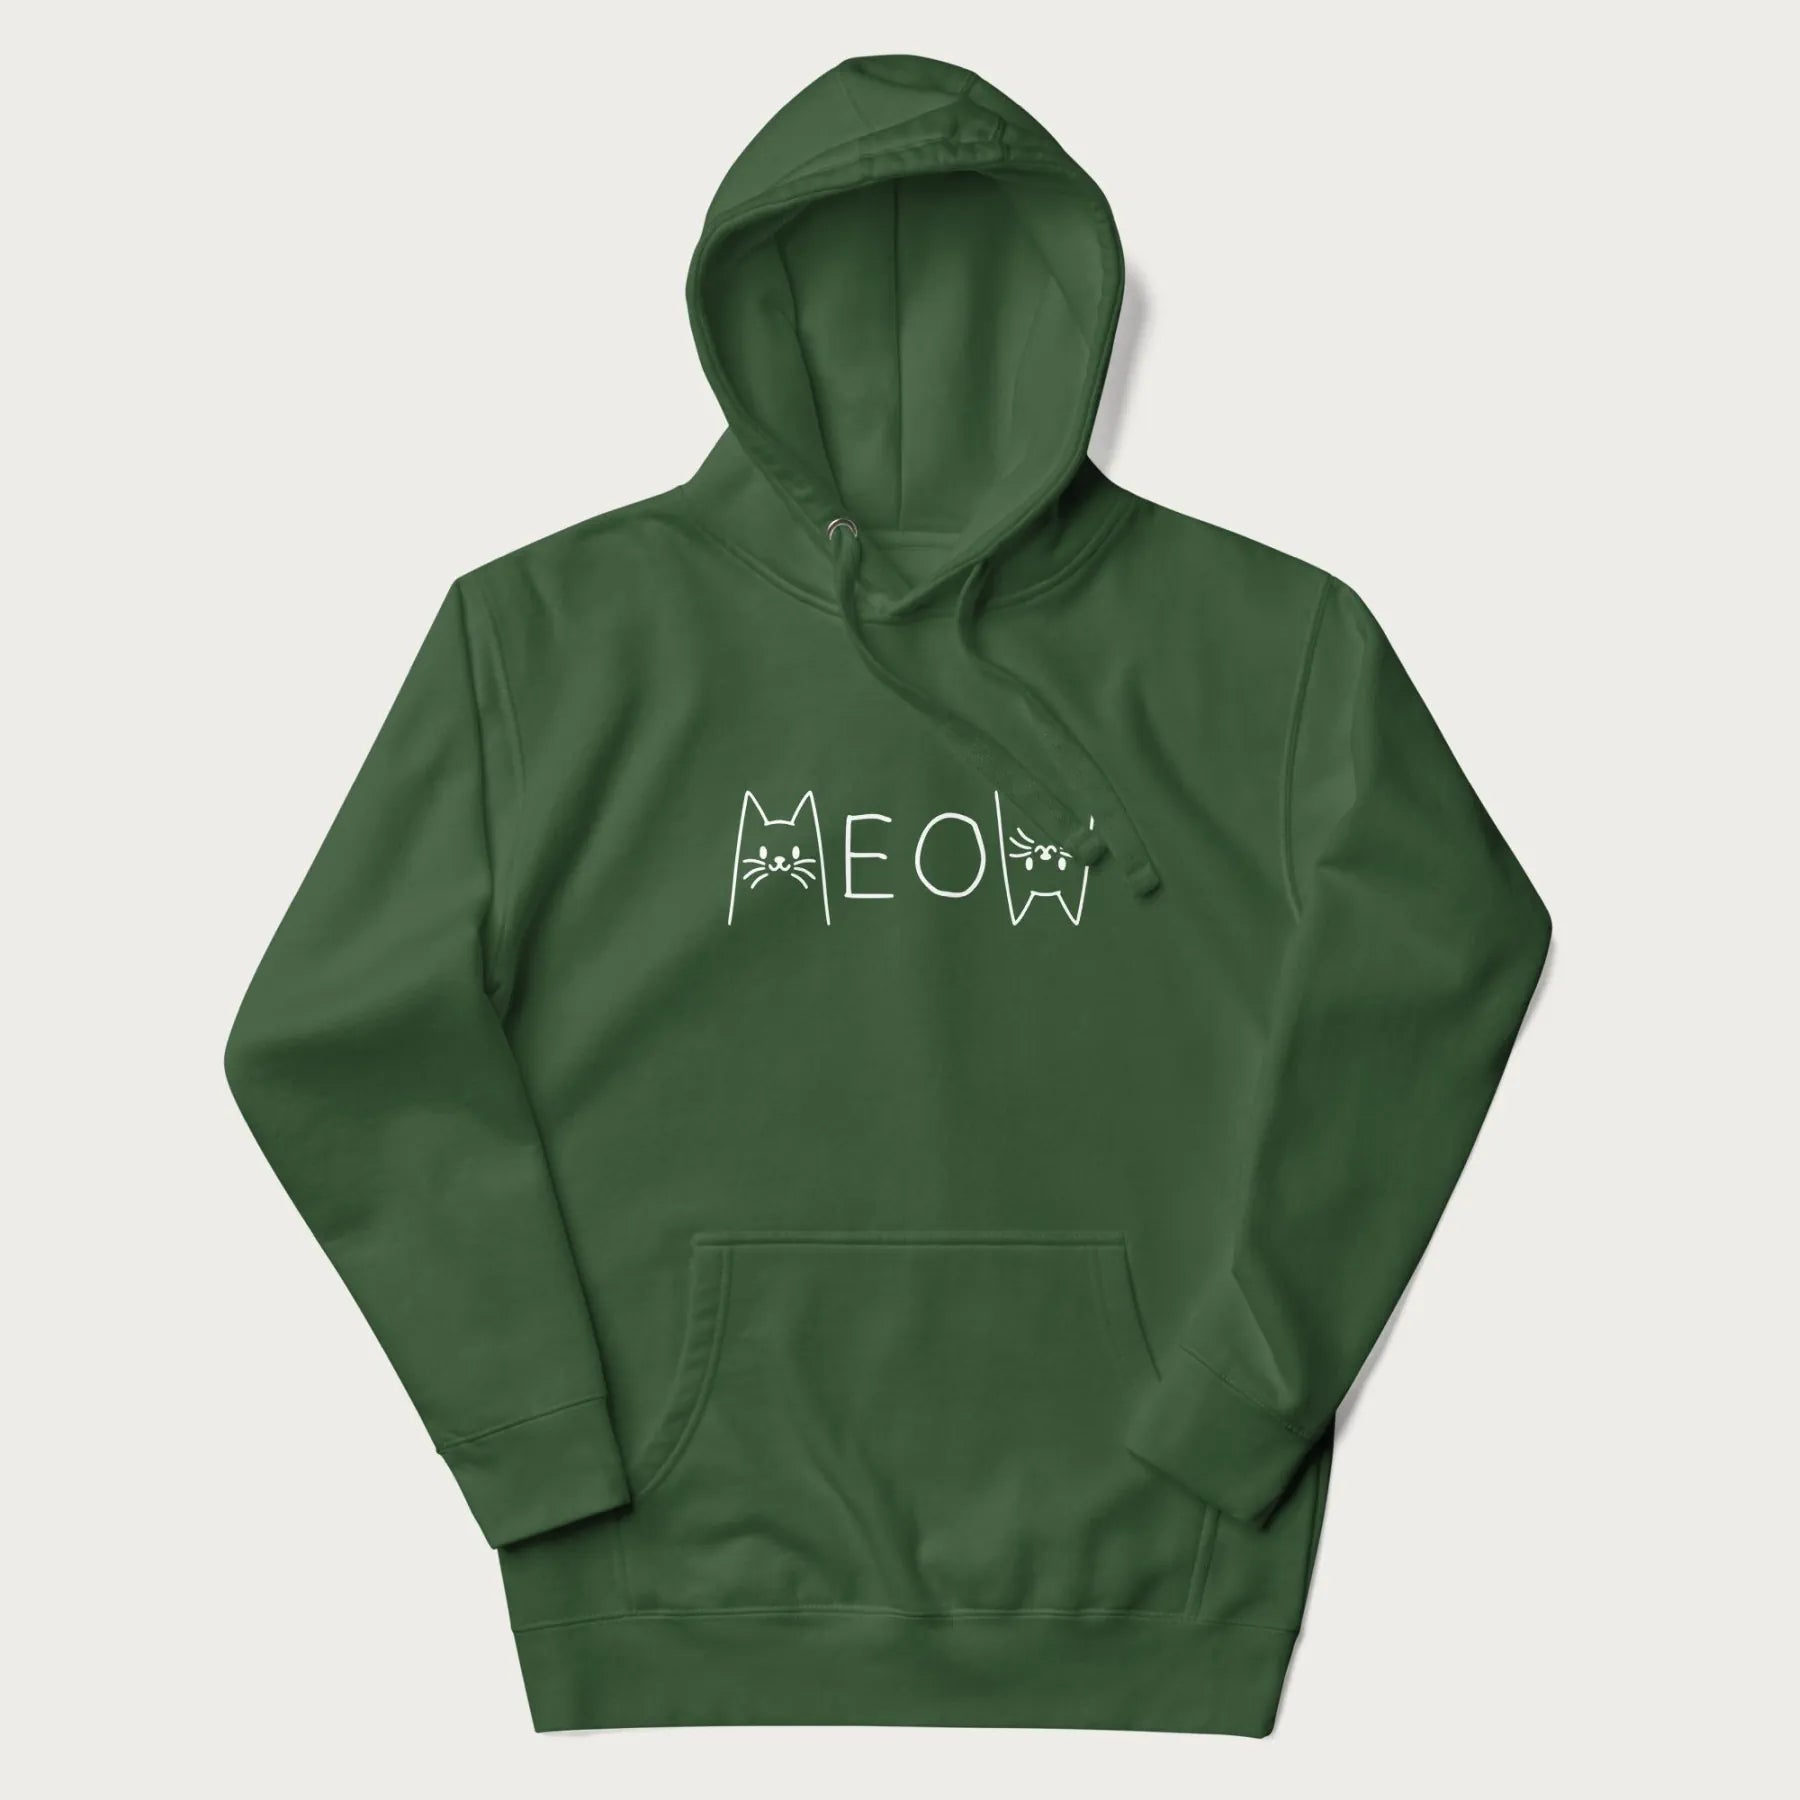 Green meow hoodie with a simple 'MEOW' text and cute cat face graphics on the front.